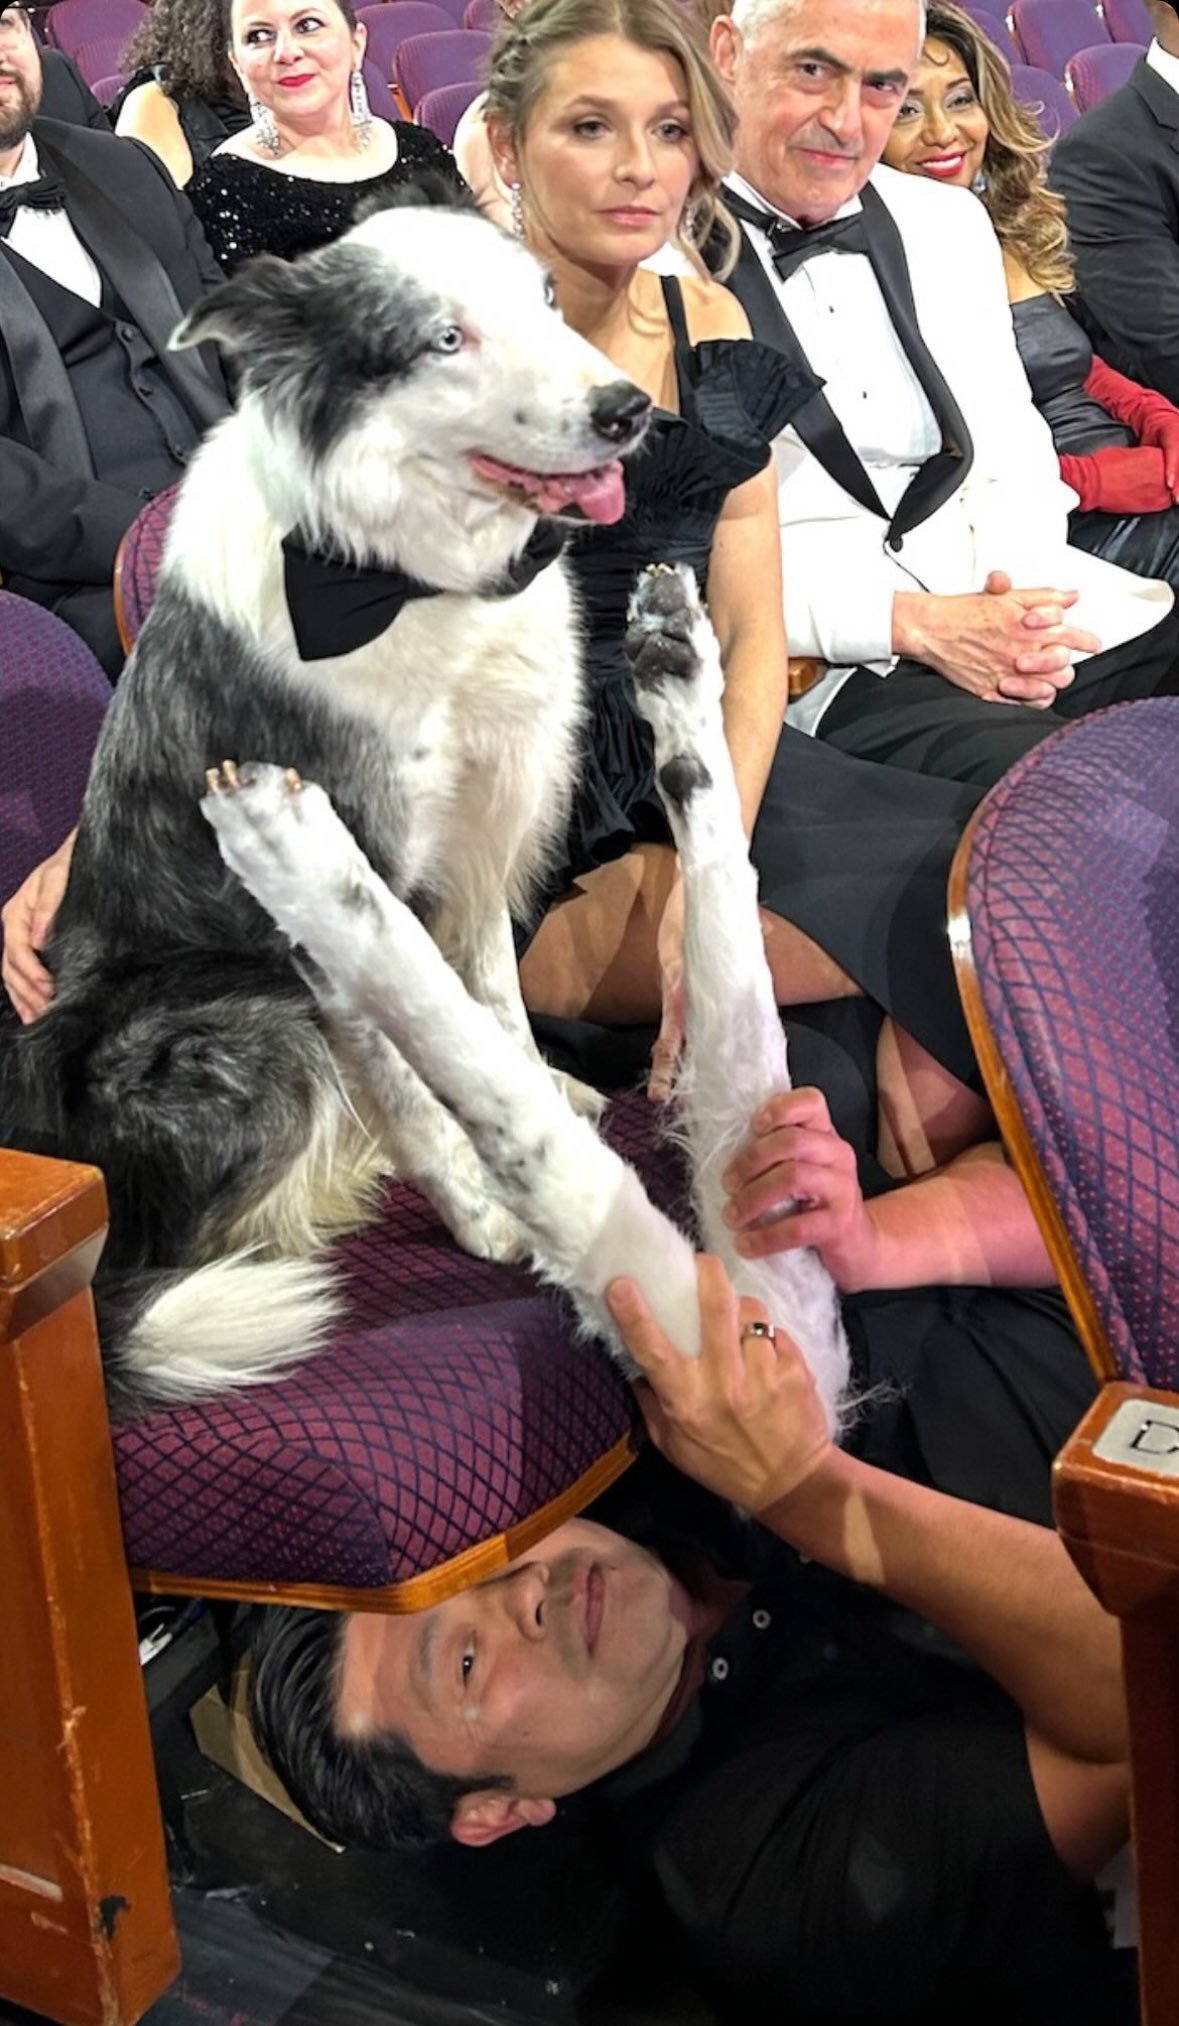 Behind the scenes of a dog clapping at the Oscars